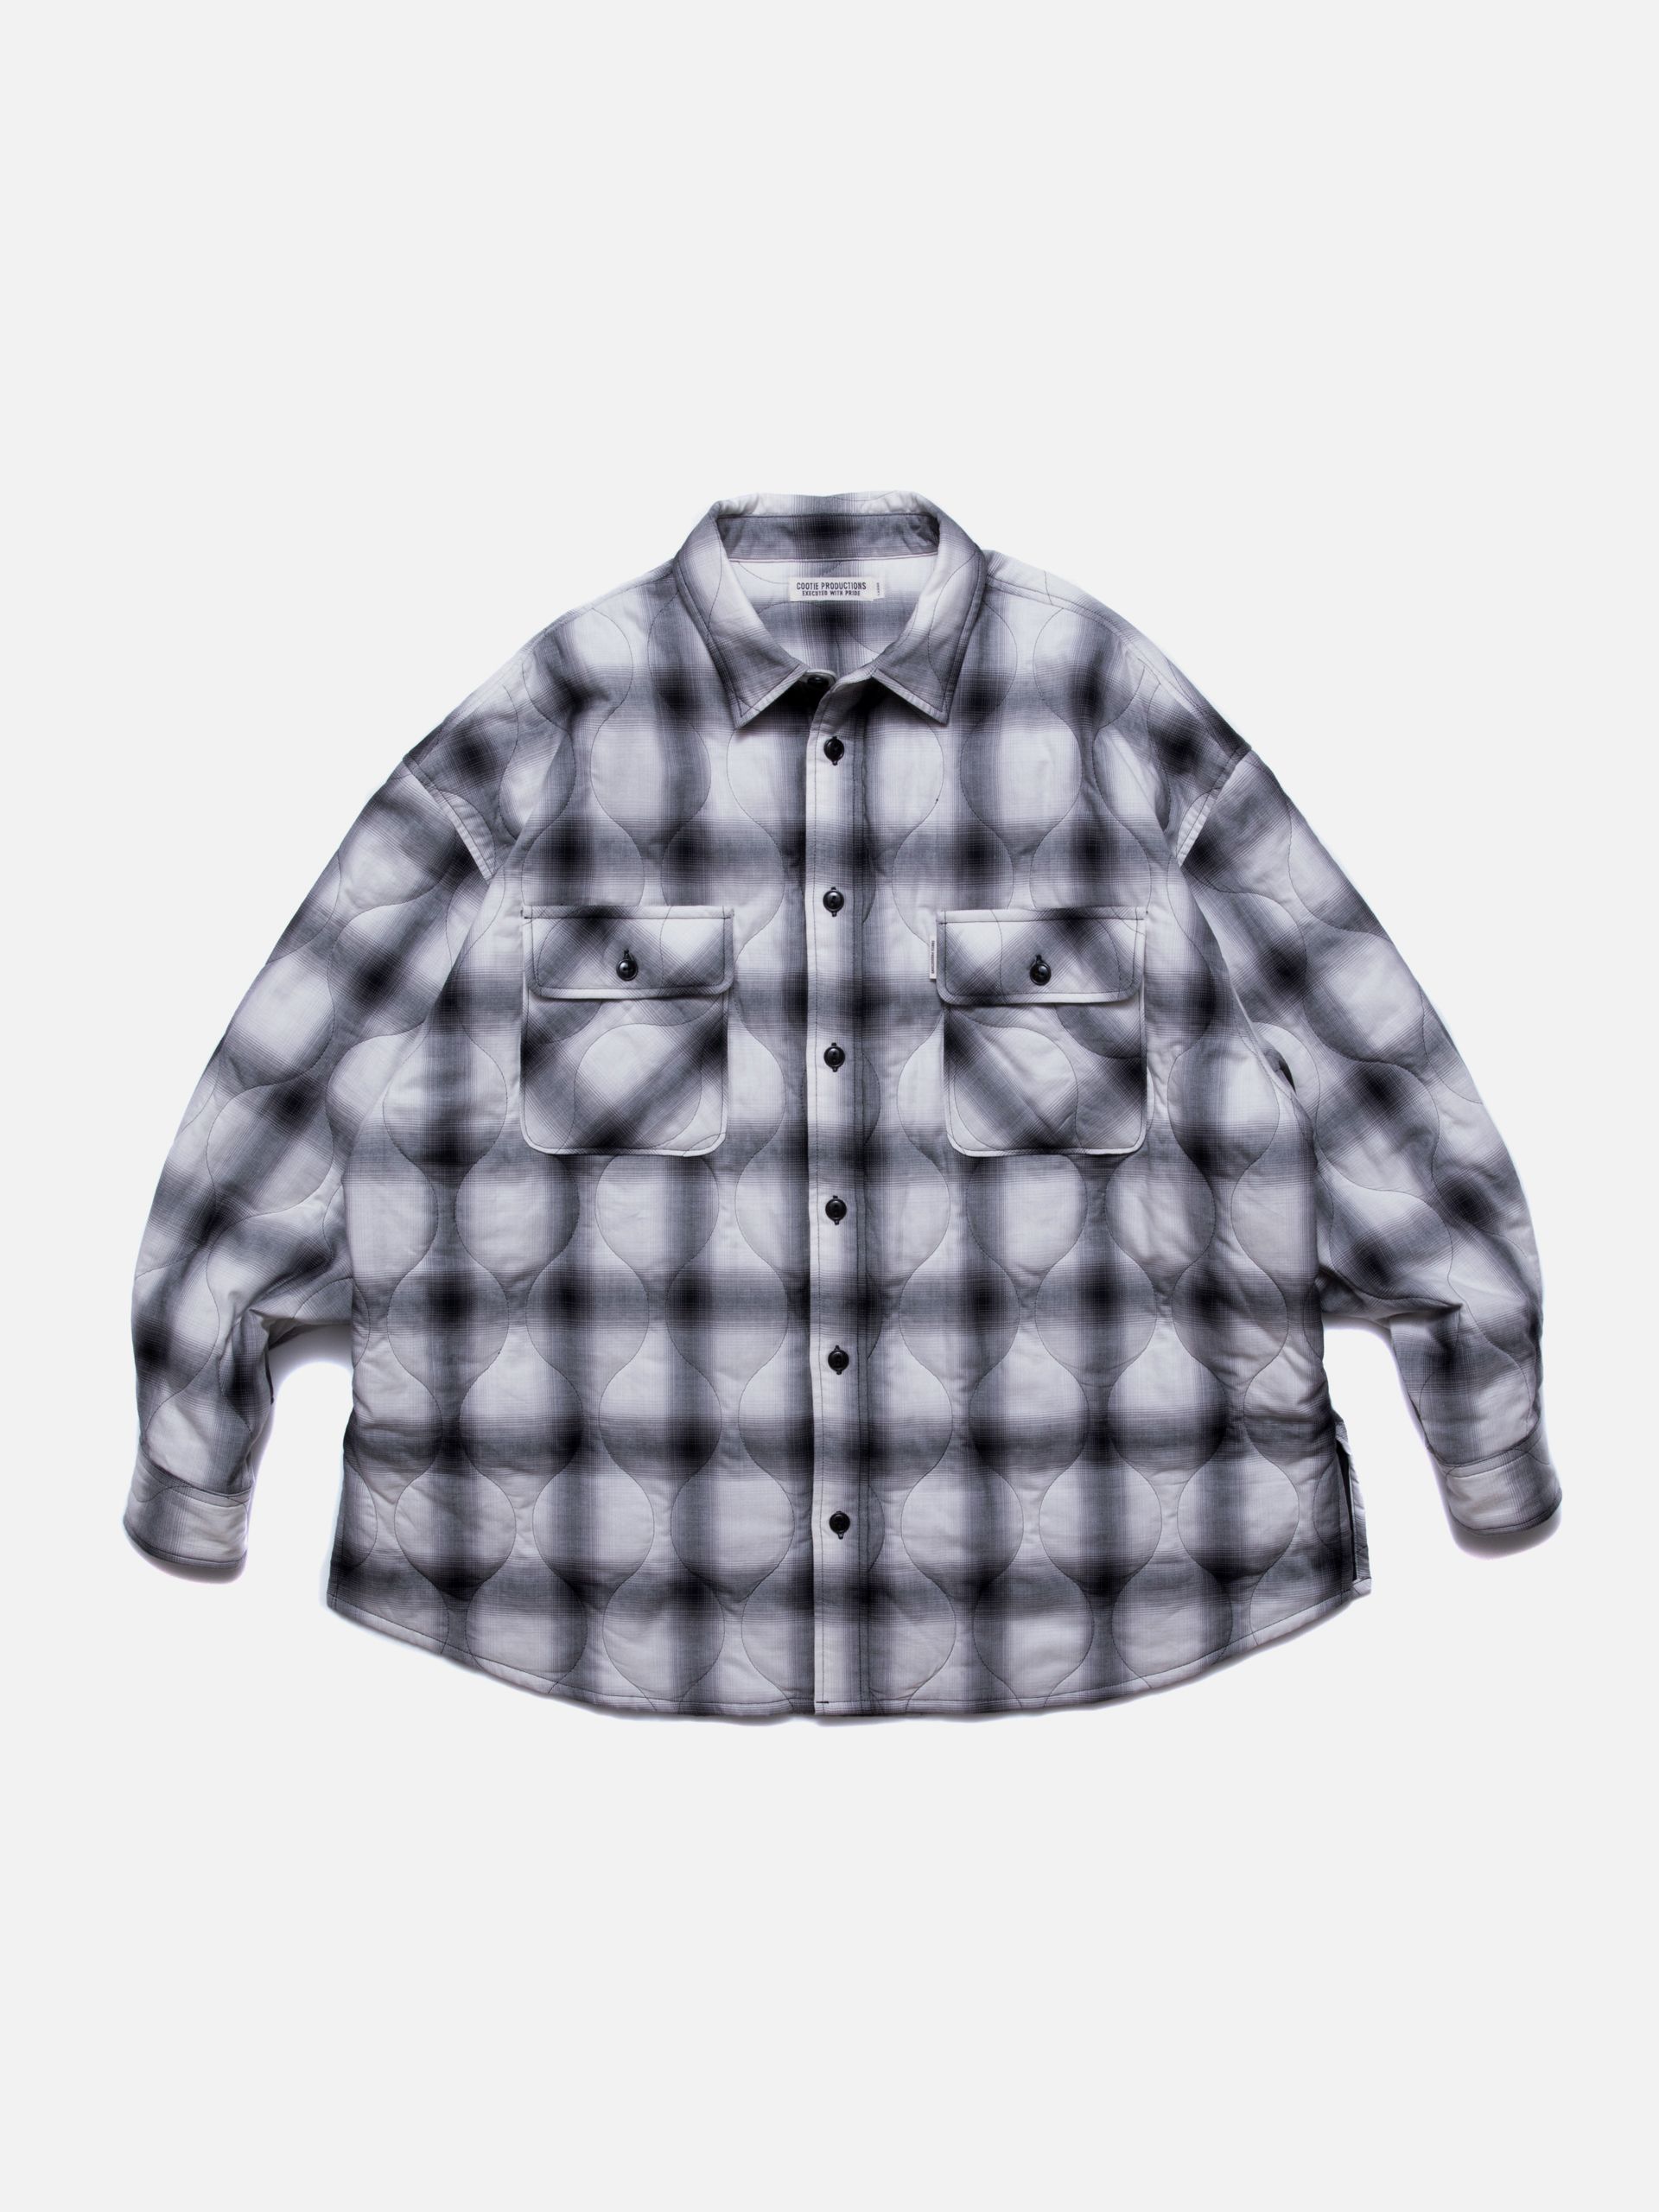 COOTIE / Ombre Check Quilting CPO Jacket